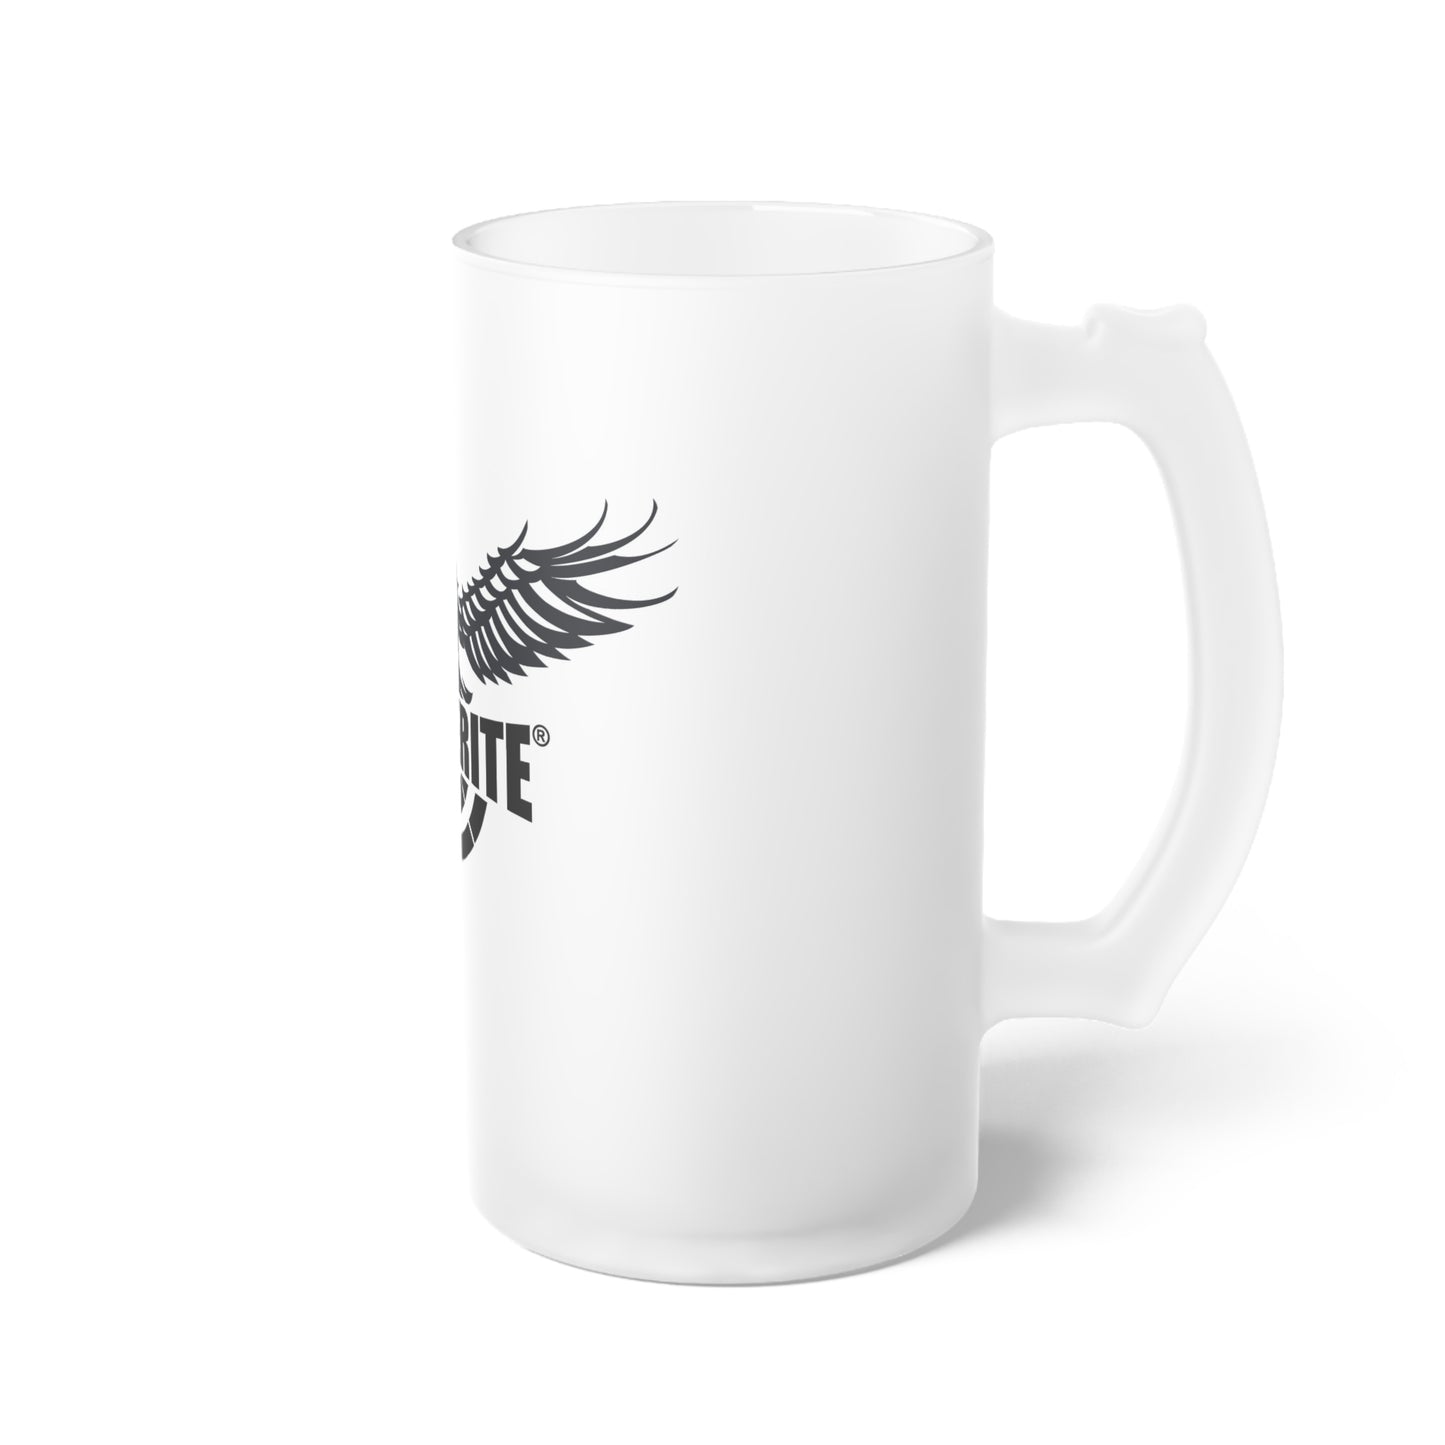 Tannerite Eagle Frosted Mug - Gift